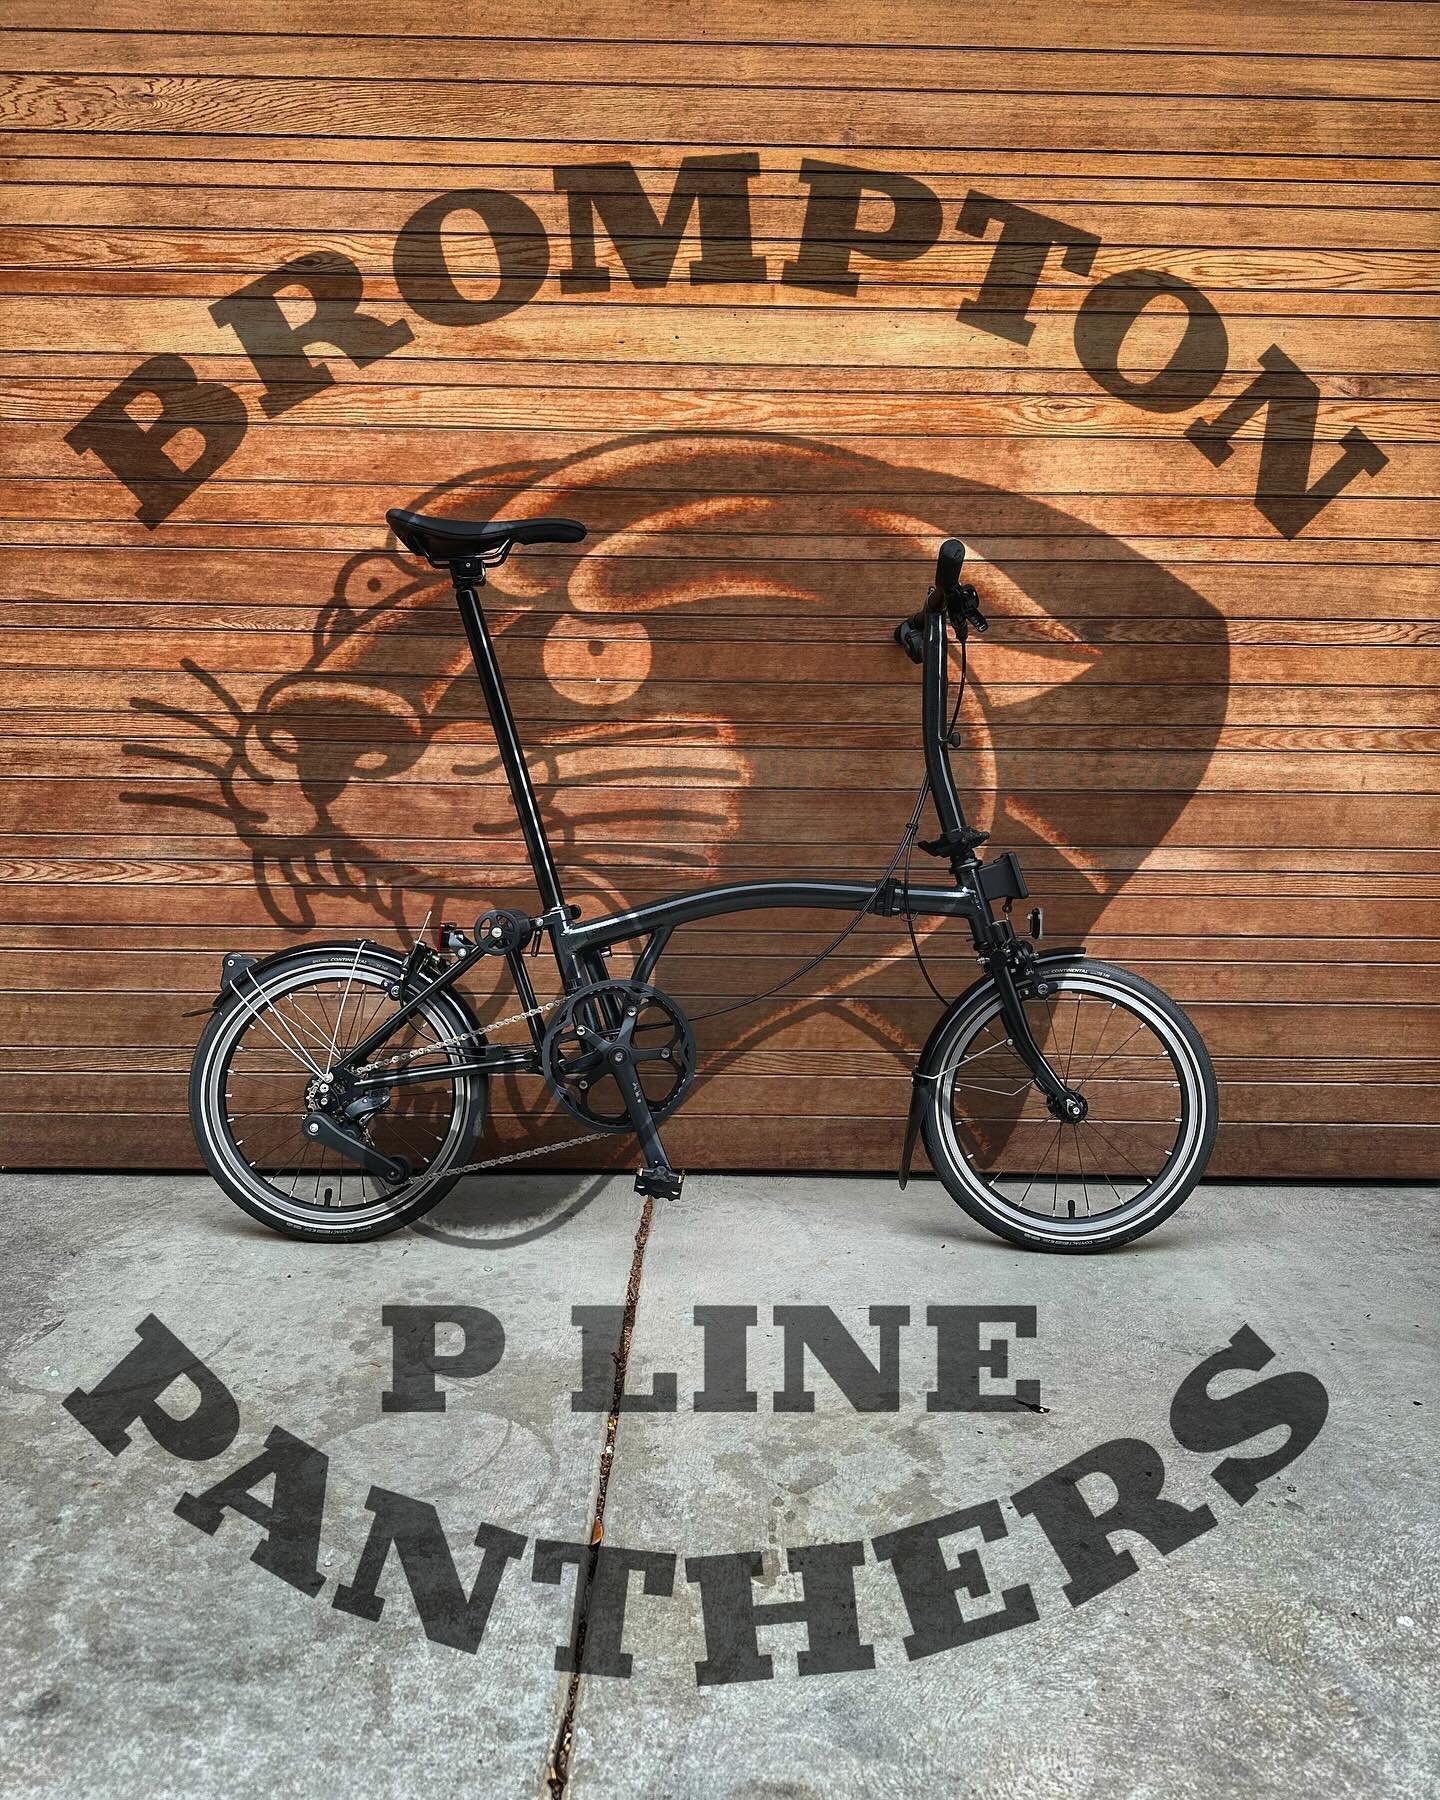 with its 4speed gearing system titanium rear triangle &amp; titanium front forks the P Line is a fast n sleek ride 
Join the club . . . 

For more info check in with your local dealer 

#bromptonpline #brompton #bromptonbicycle #bromptoncommunity 
#b